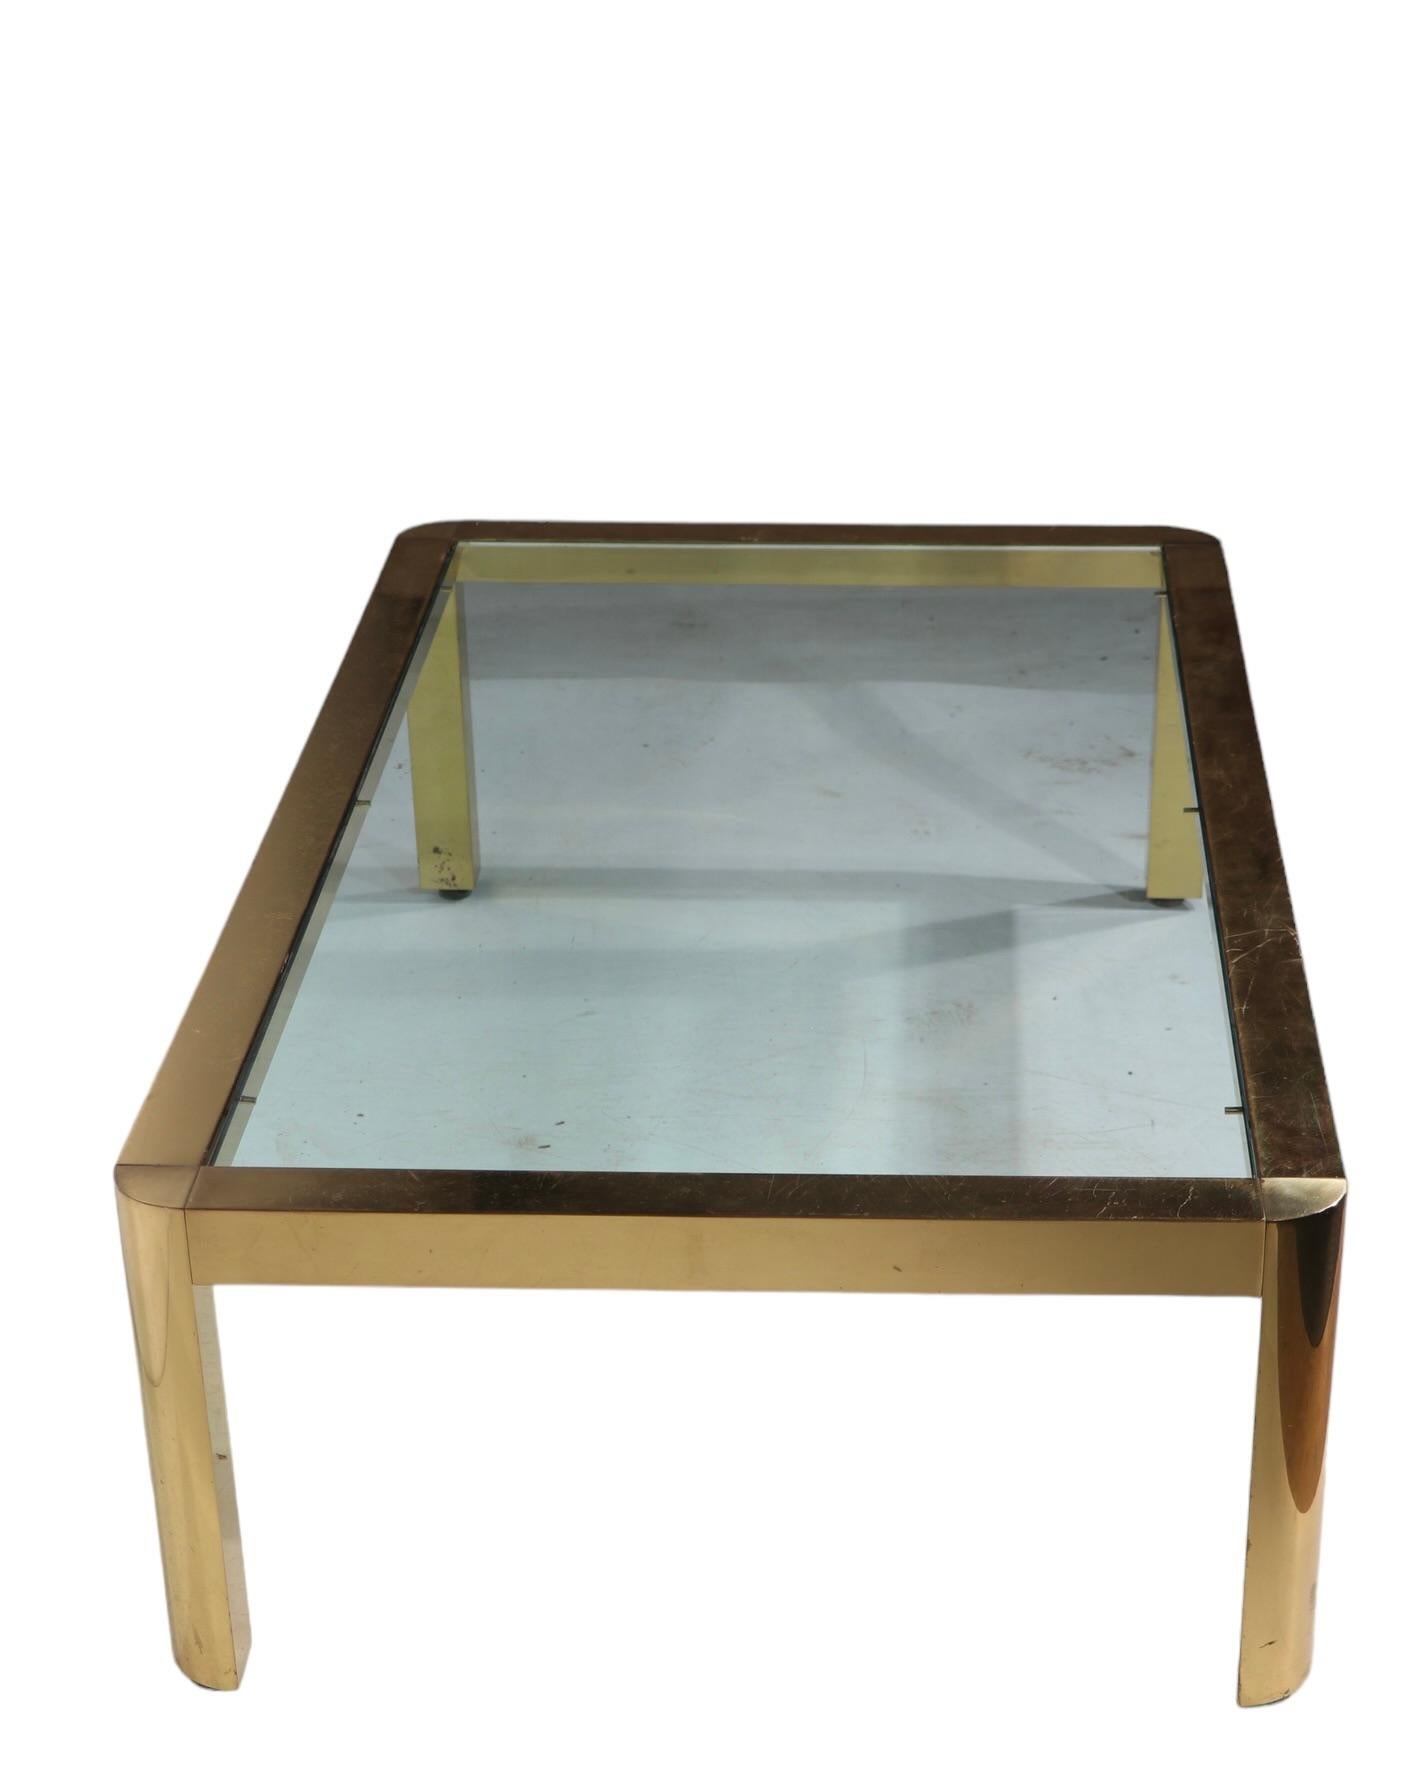 Postmodern Hollywood Regency Brass and Glass Coffee Table Made in Italy c 1970's For Sale 1